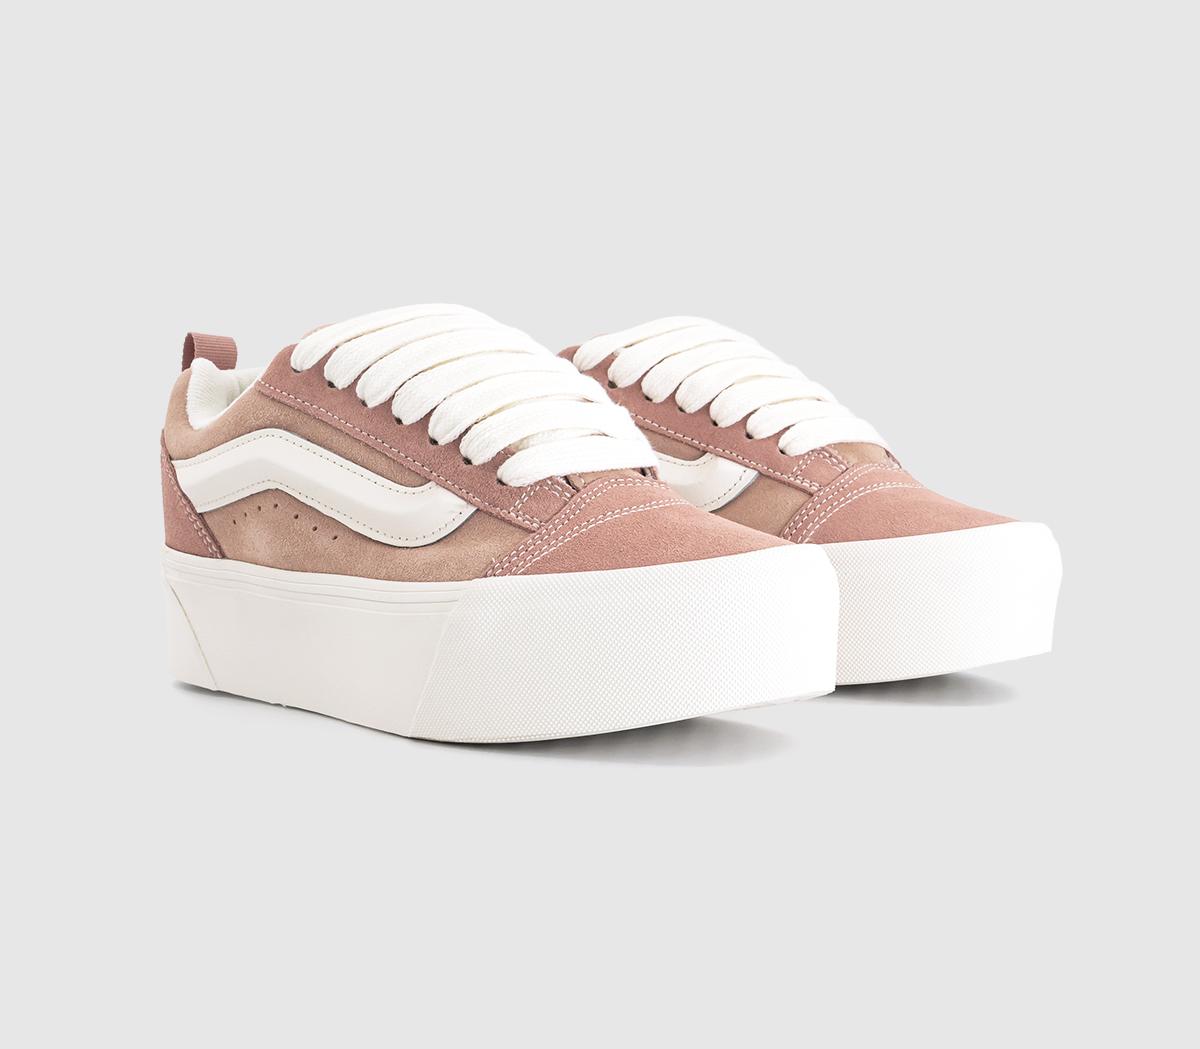 Vans Knu Stack Trainers Toasted Almond Natural, 3.5